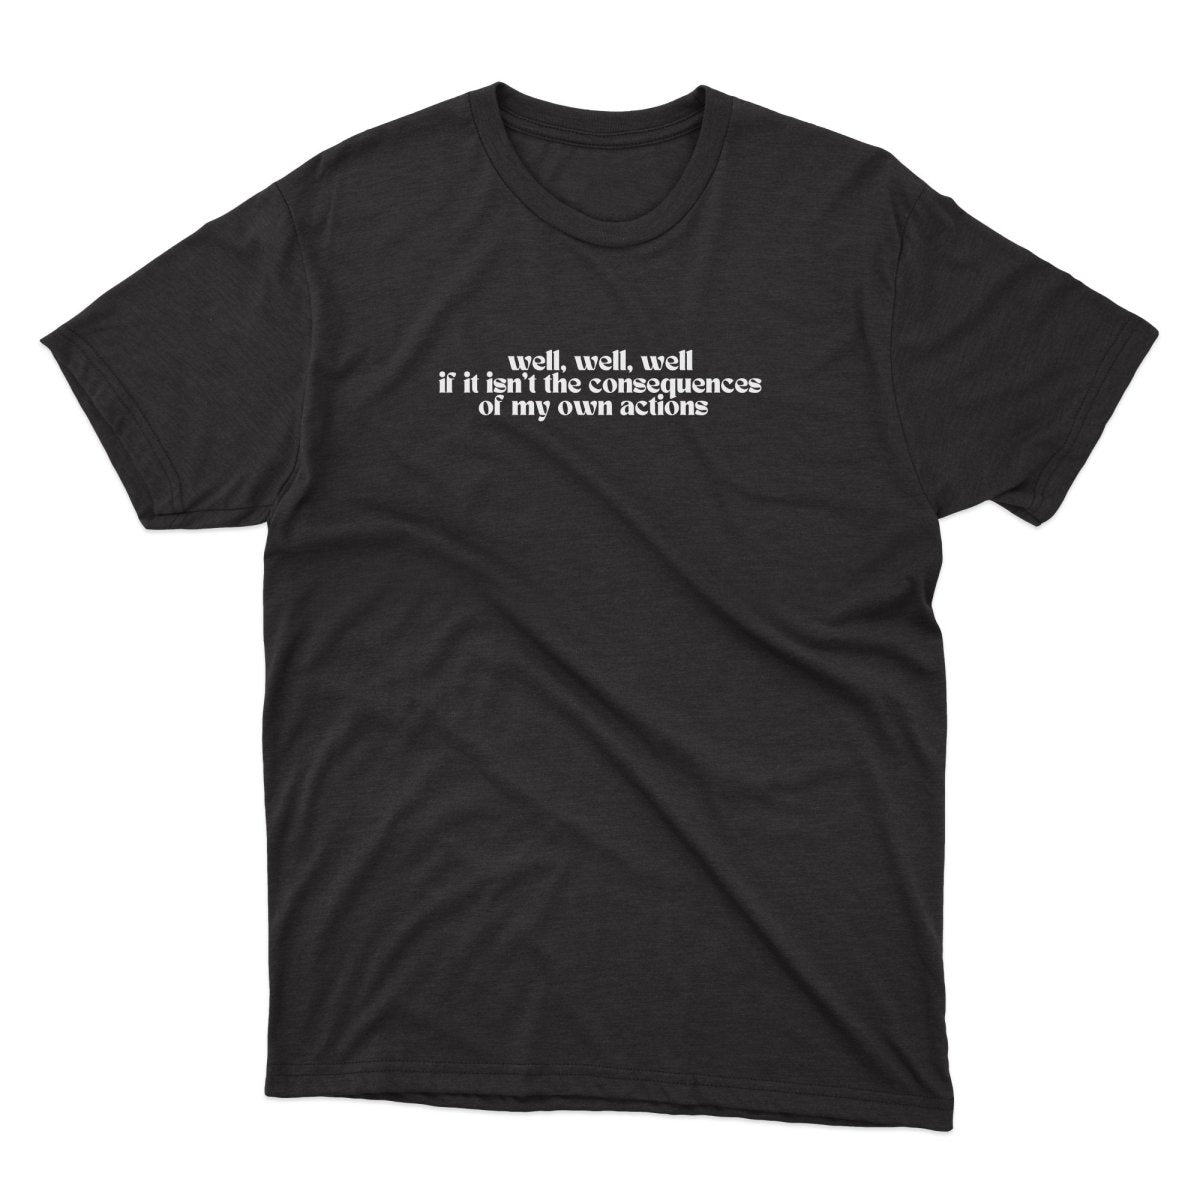 Consequences Of My Own Actions Shirt - stickerbullConsequences Of My Own Actions ShirtShirtsPrintifystickerbull33506101472586163867BlackSa black t - shirt with a white quote on it